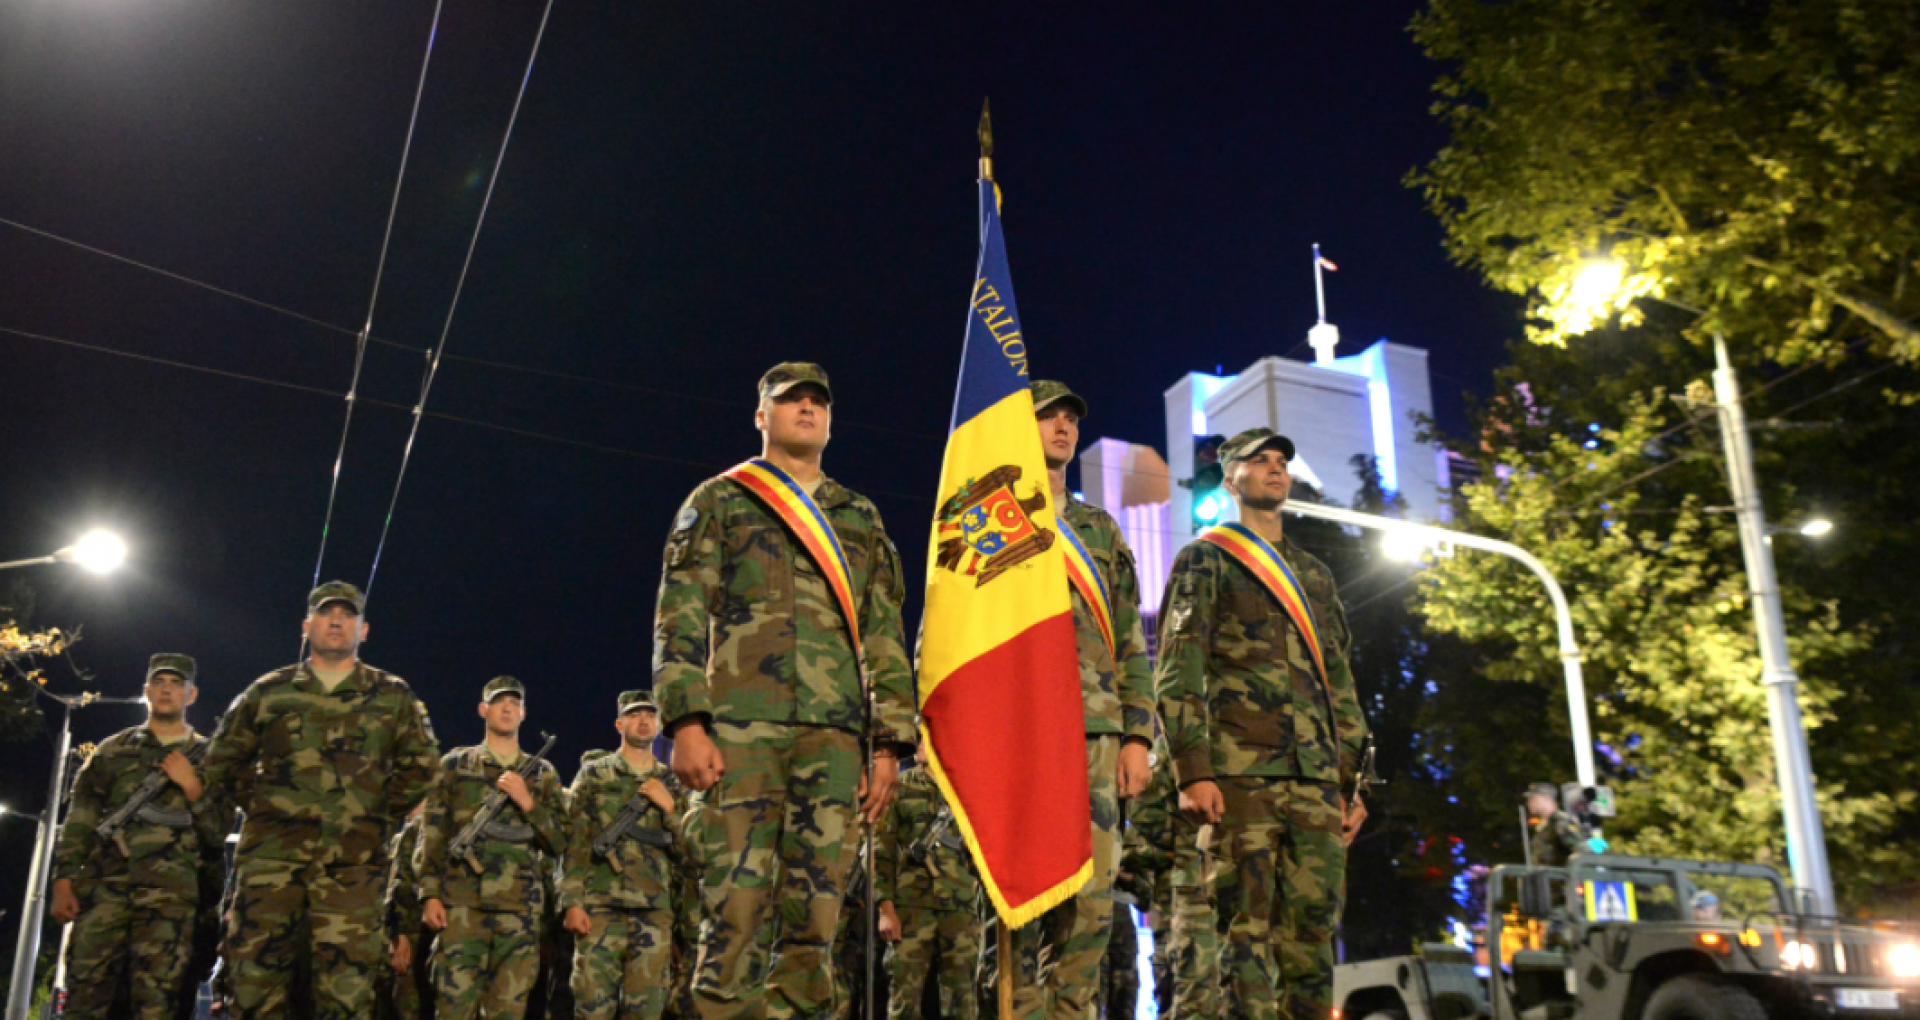 The Presidents of Poland, Romania, and Ukraine Visit Moldova on Independence Day